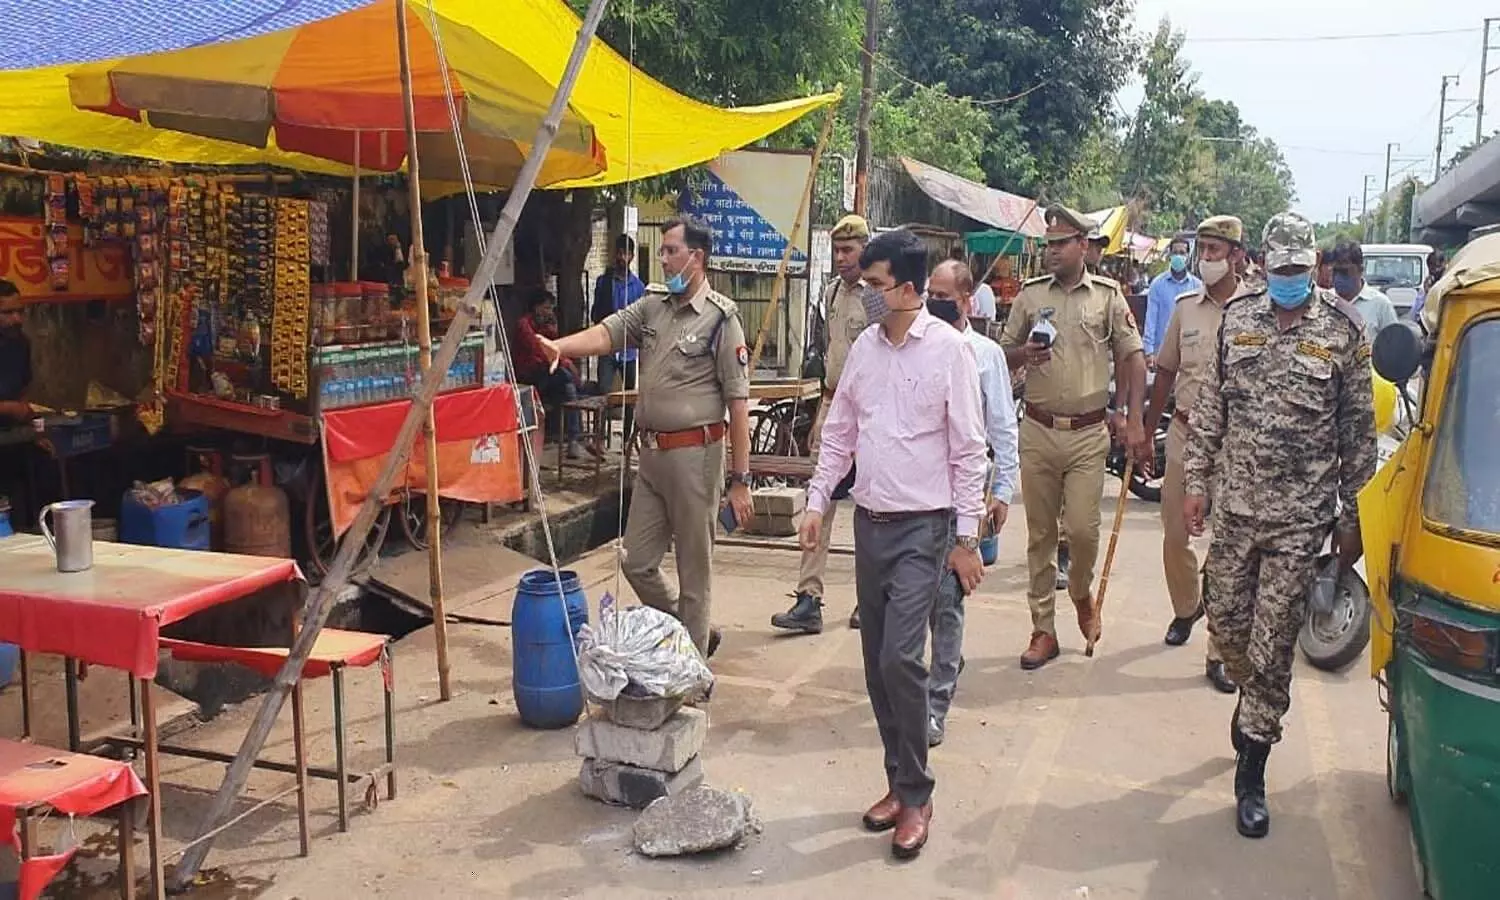 Encroachment removed in Charbagh